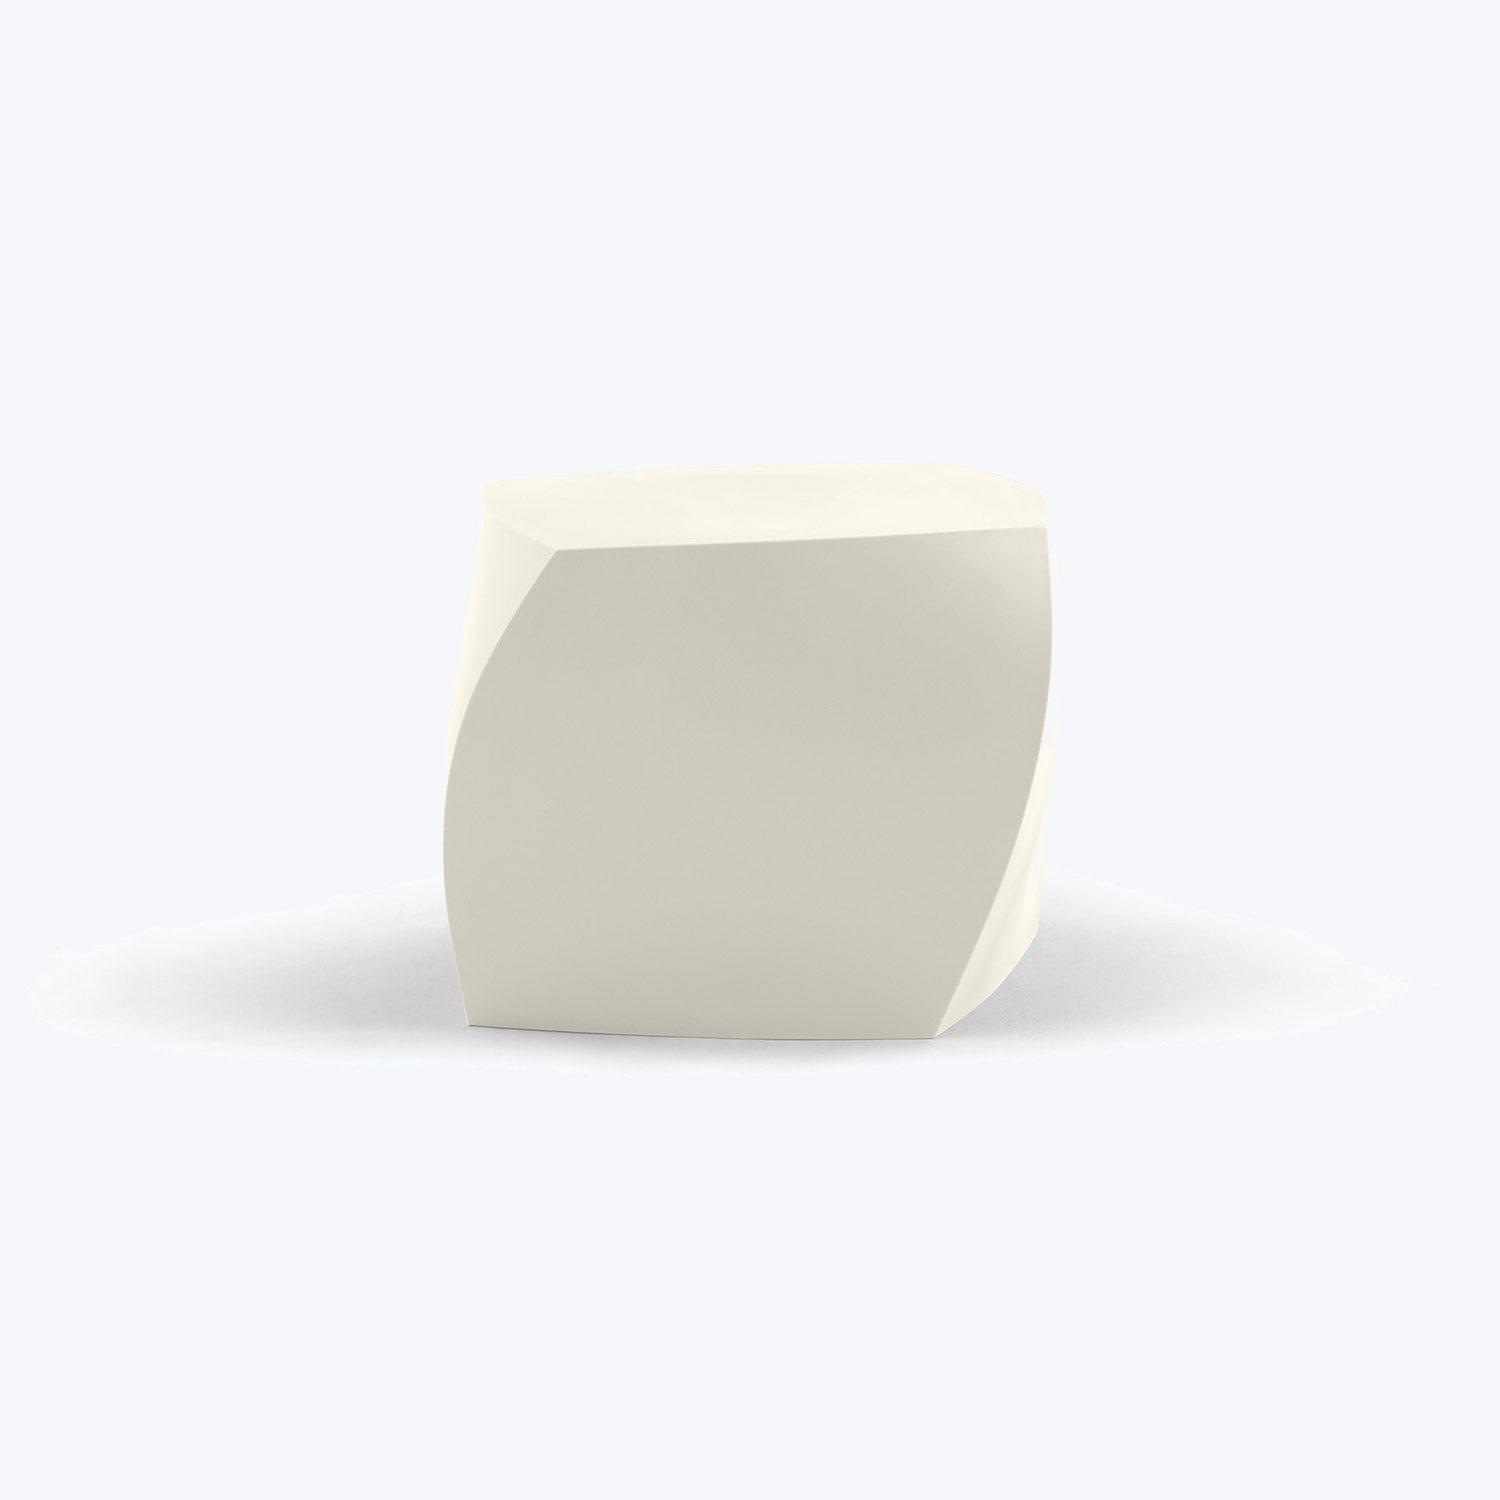 Gehry Left Twist Cube White